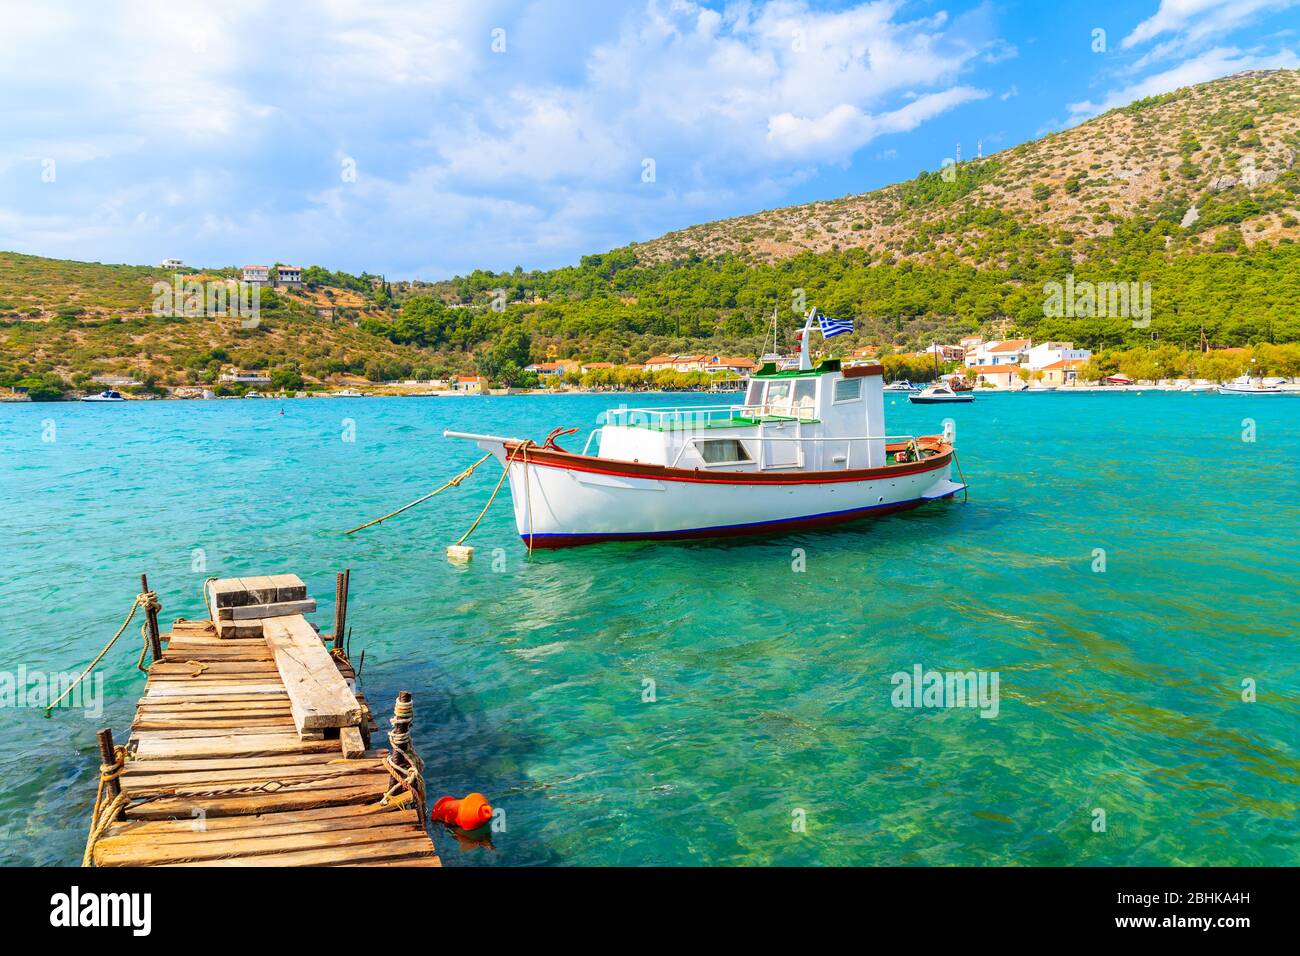 Wooden pier and colourful Greek fishing boat on turquoise sea in Posidonio bay, Samos island, Greece Stock Photo